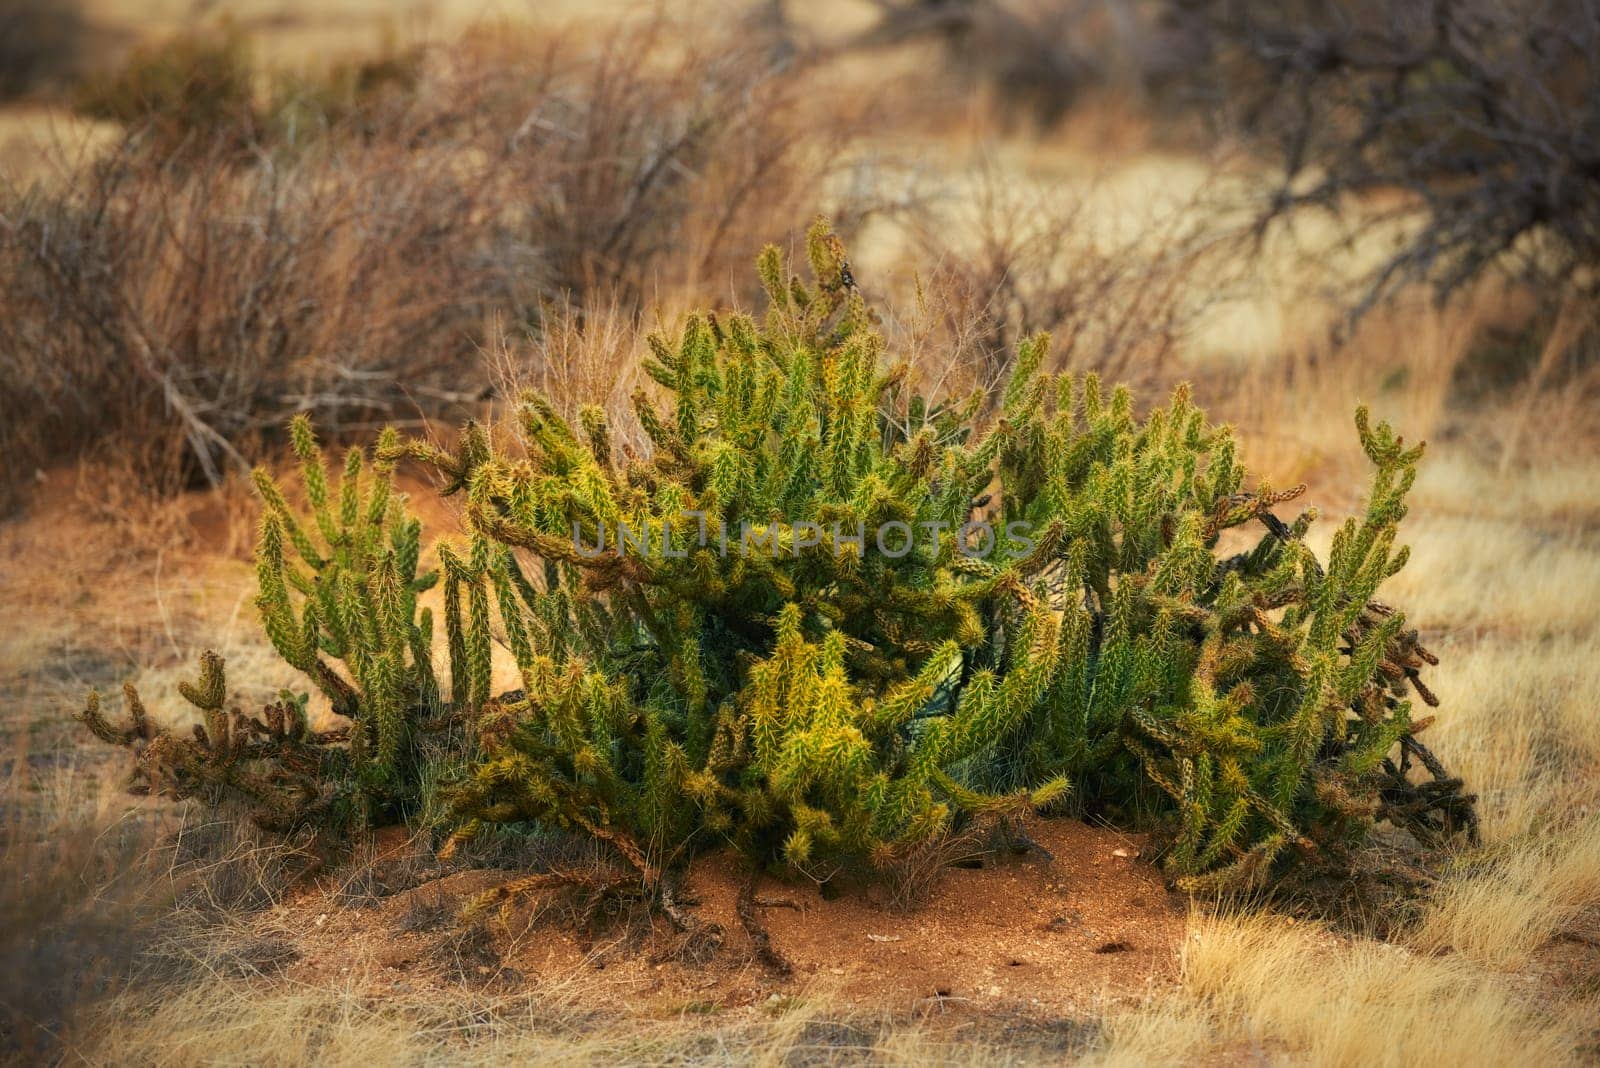 Desert, cactus and plant in bush environment outdoor in nature of California, USA. Natural, succulent and growth of indigenous shrub in summer with biodiversity in dry field, soil and grass on land by YuriArcurs